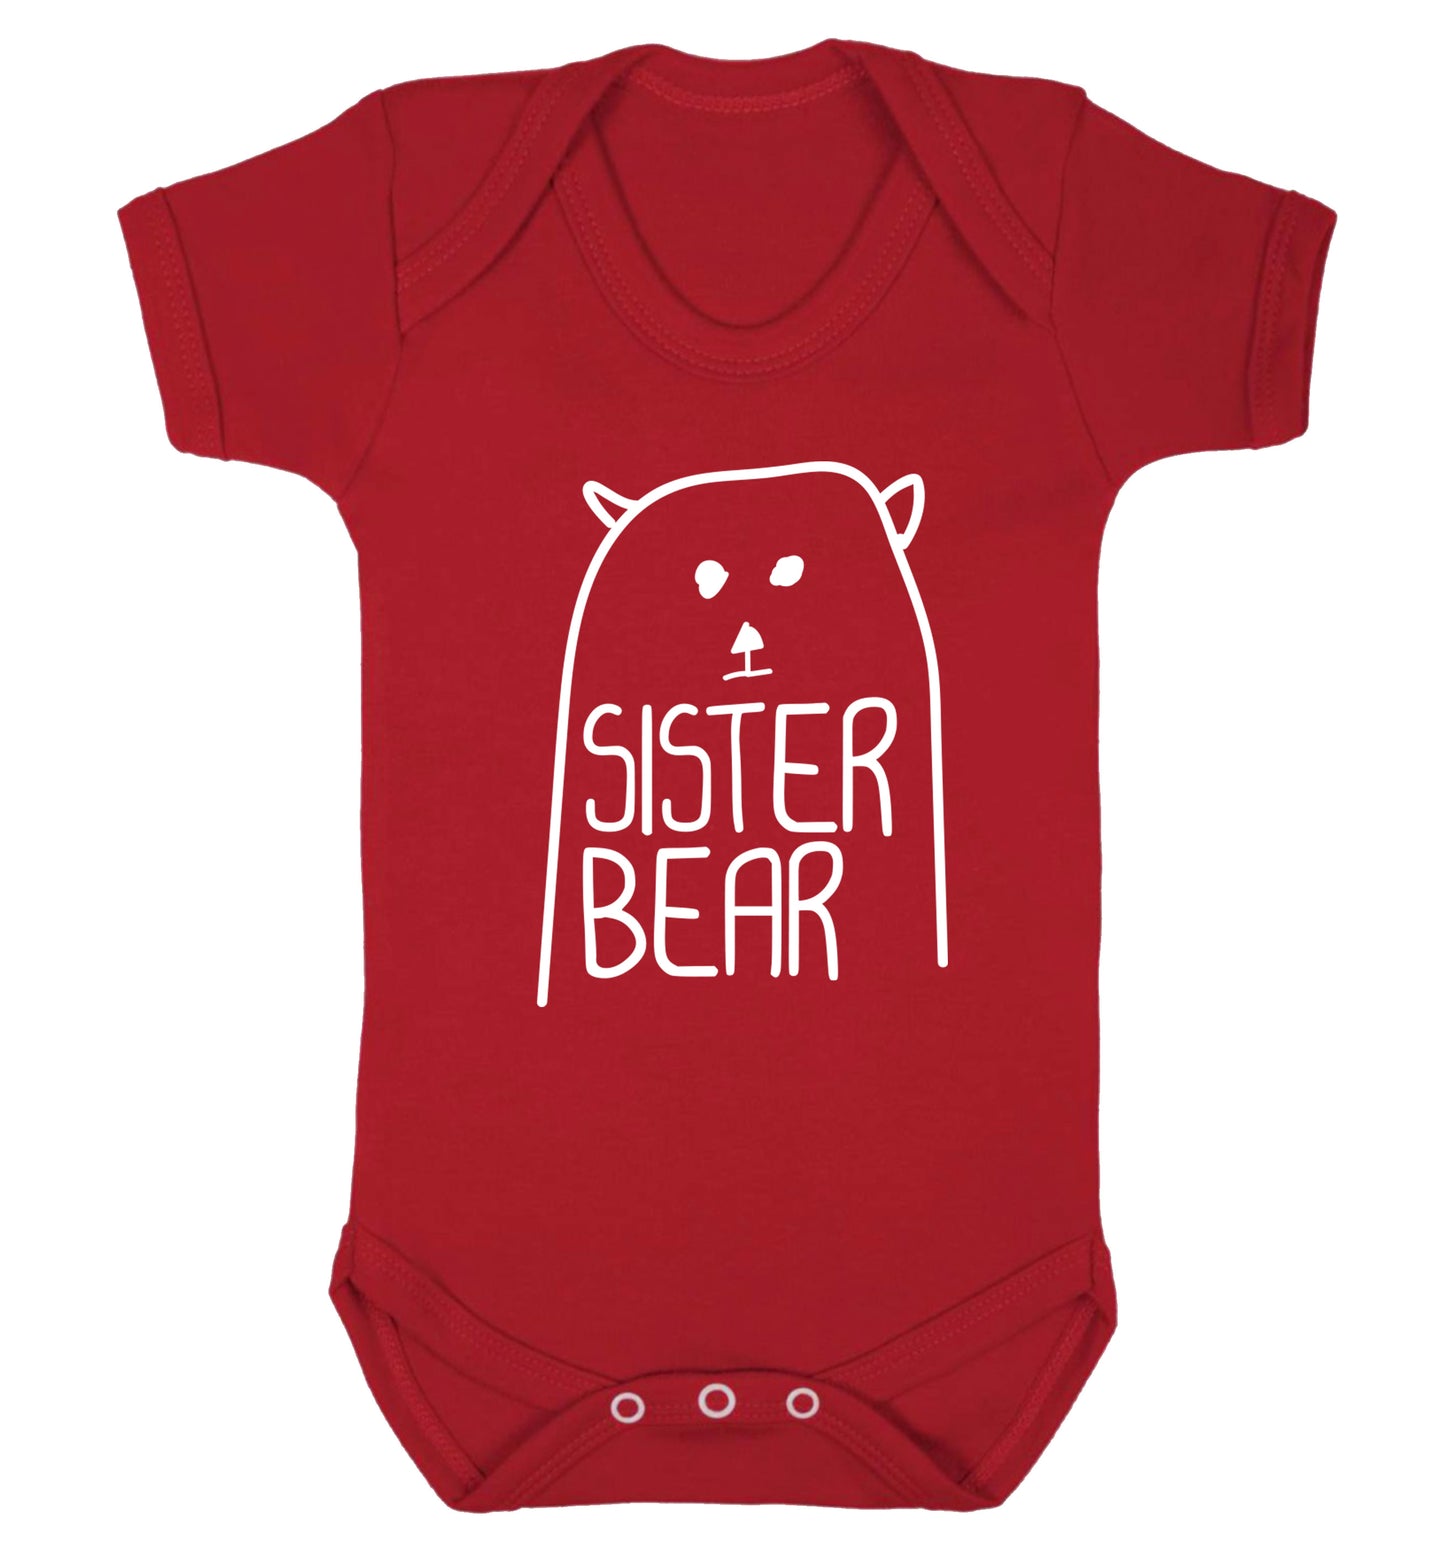 Sister bear Baby Vest red 18-24 months